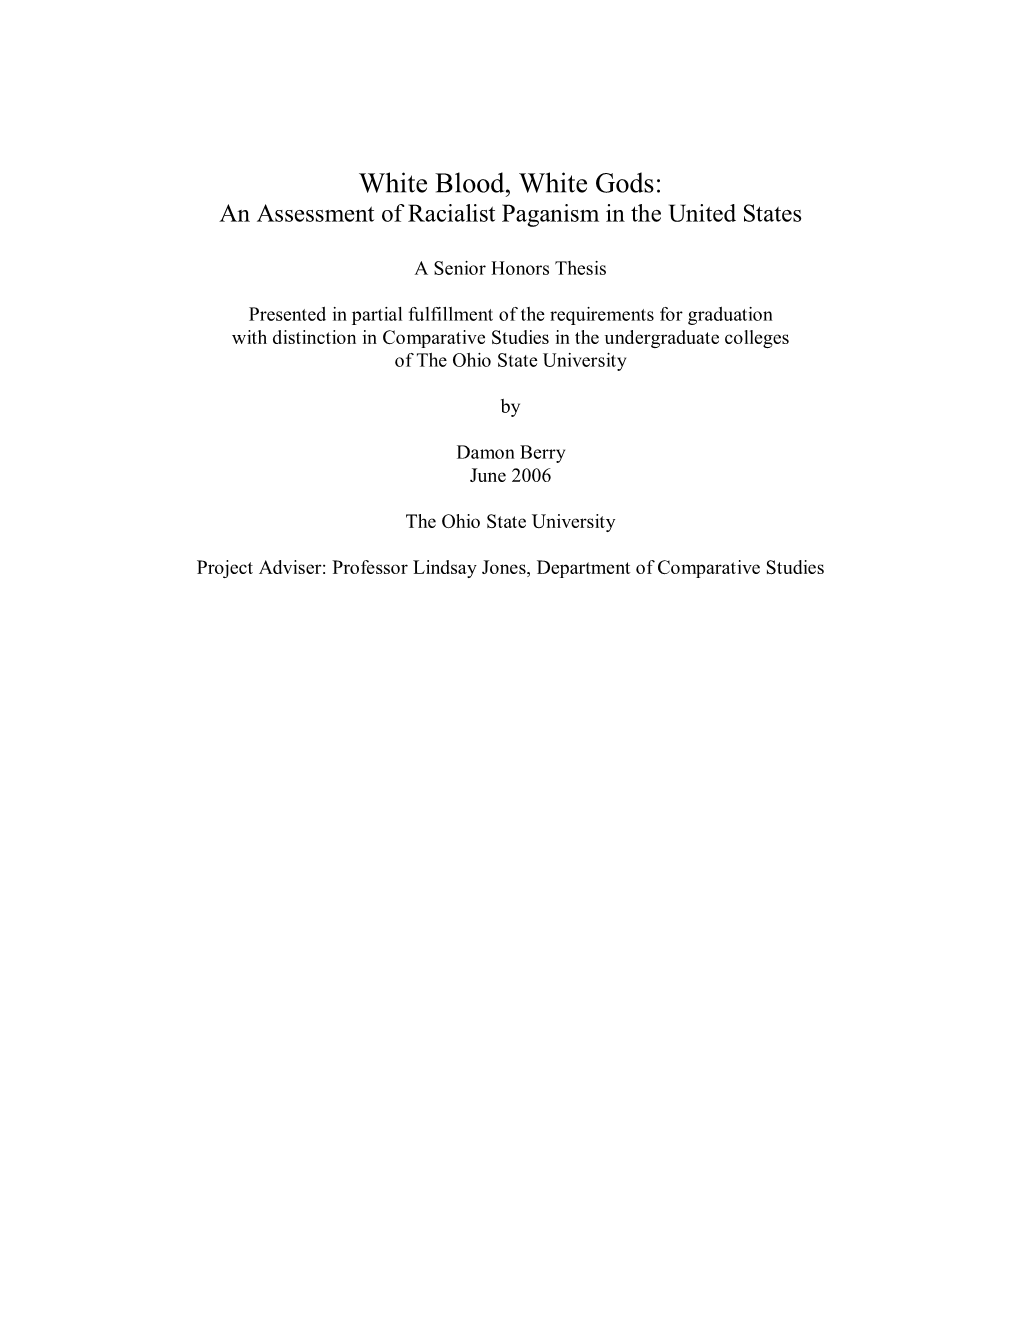 White Blood, White Gods: an Assessment of Racialist Paganism in the United States